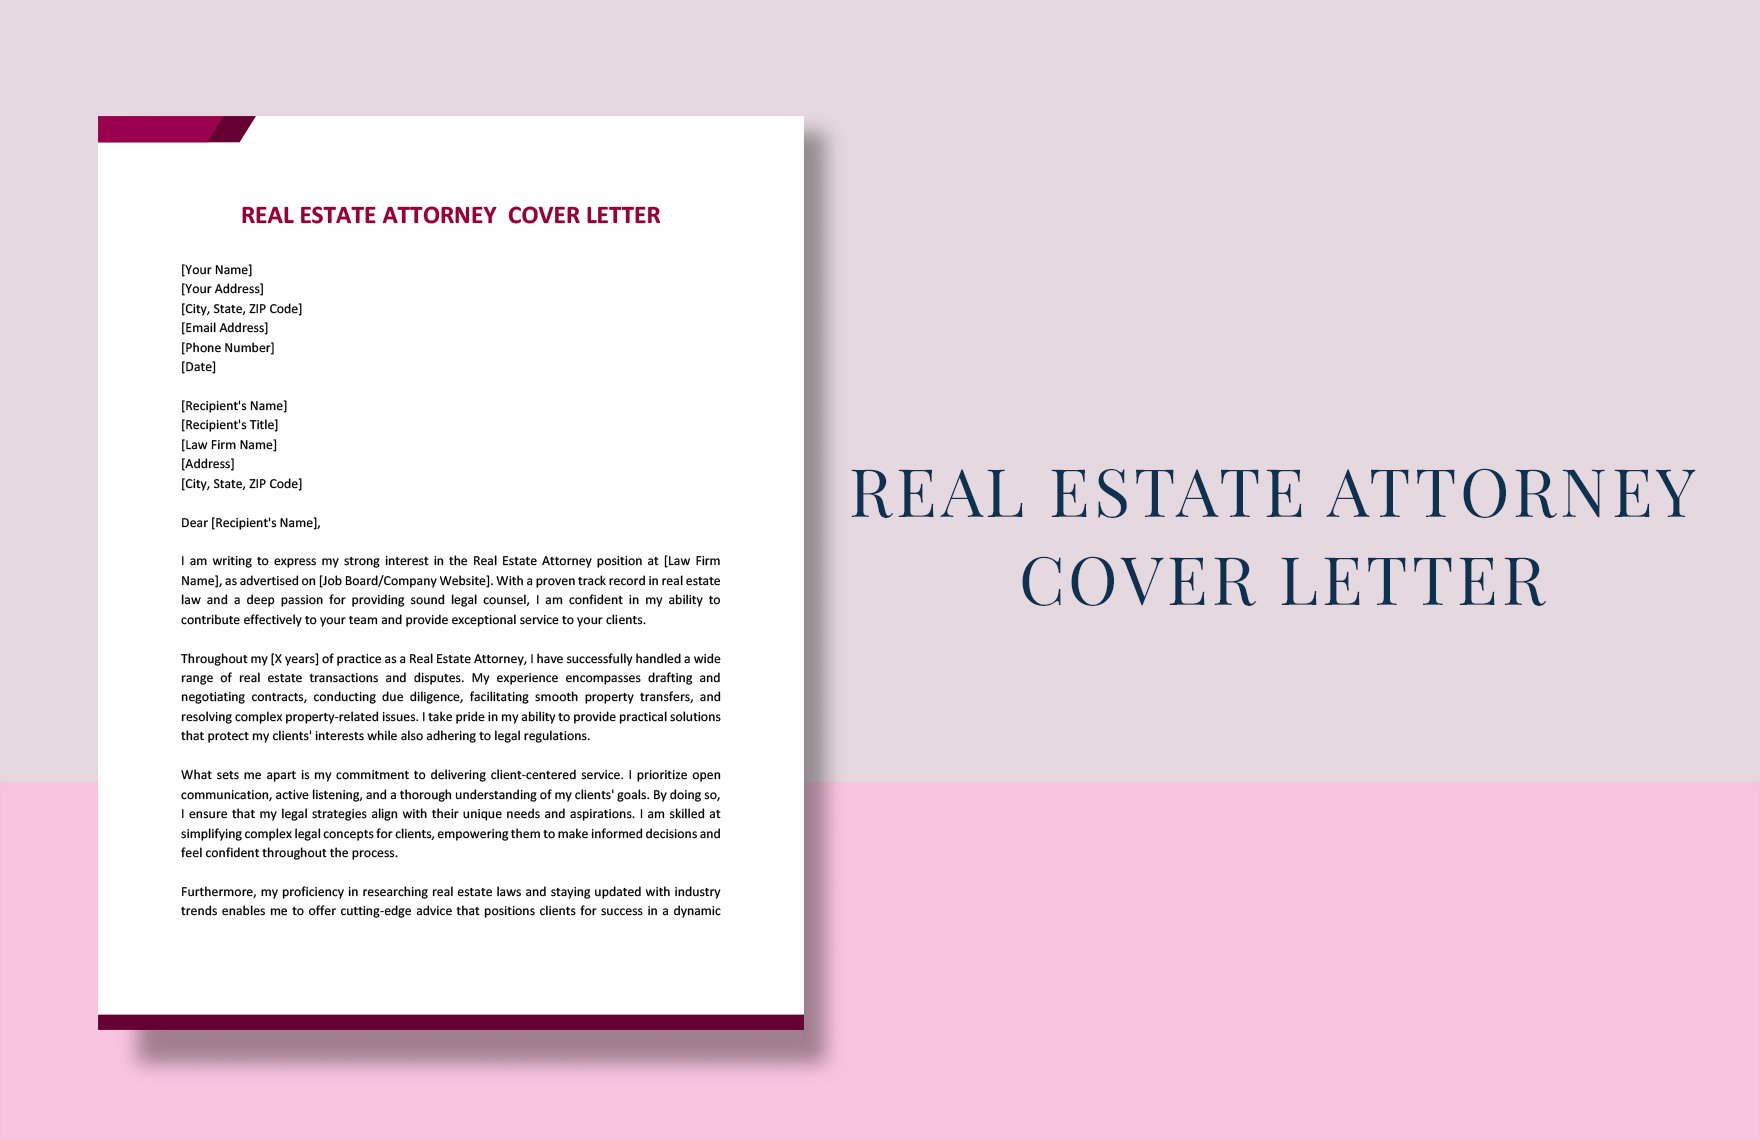 Real Estate Attorney Cover Letter